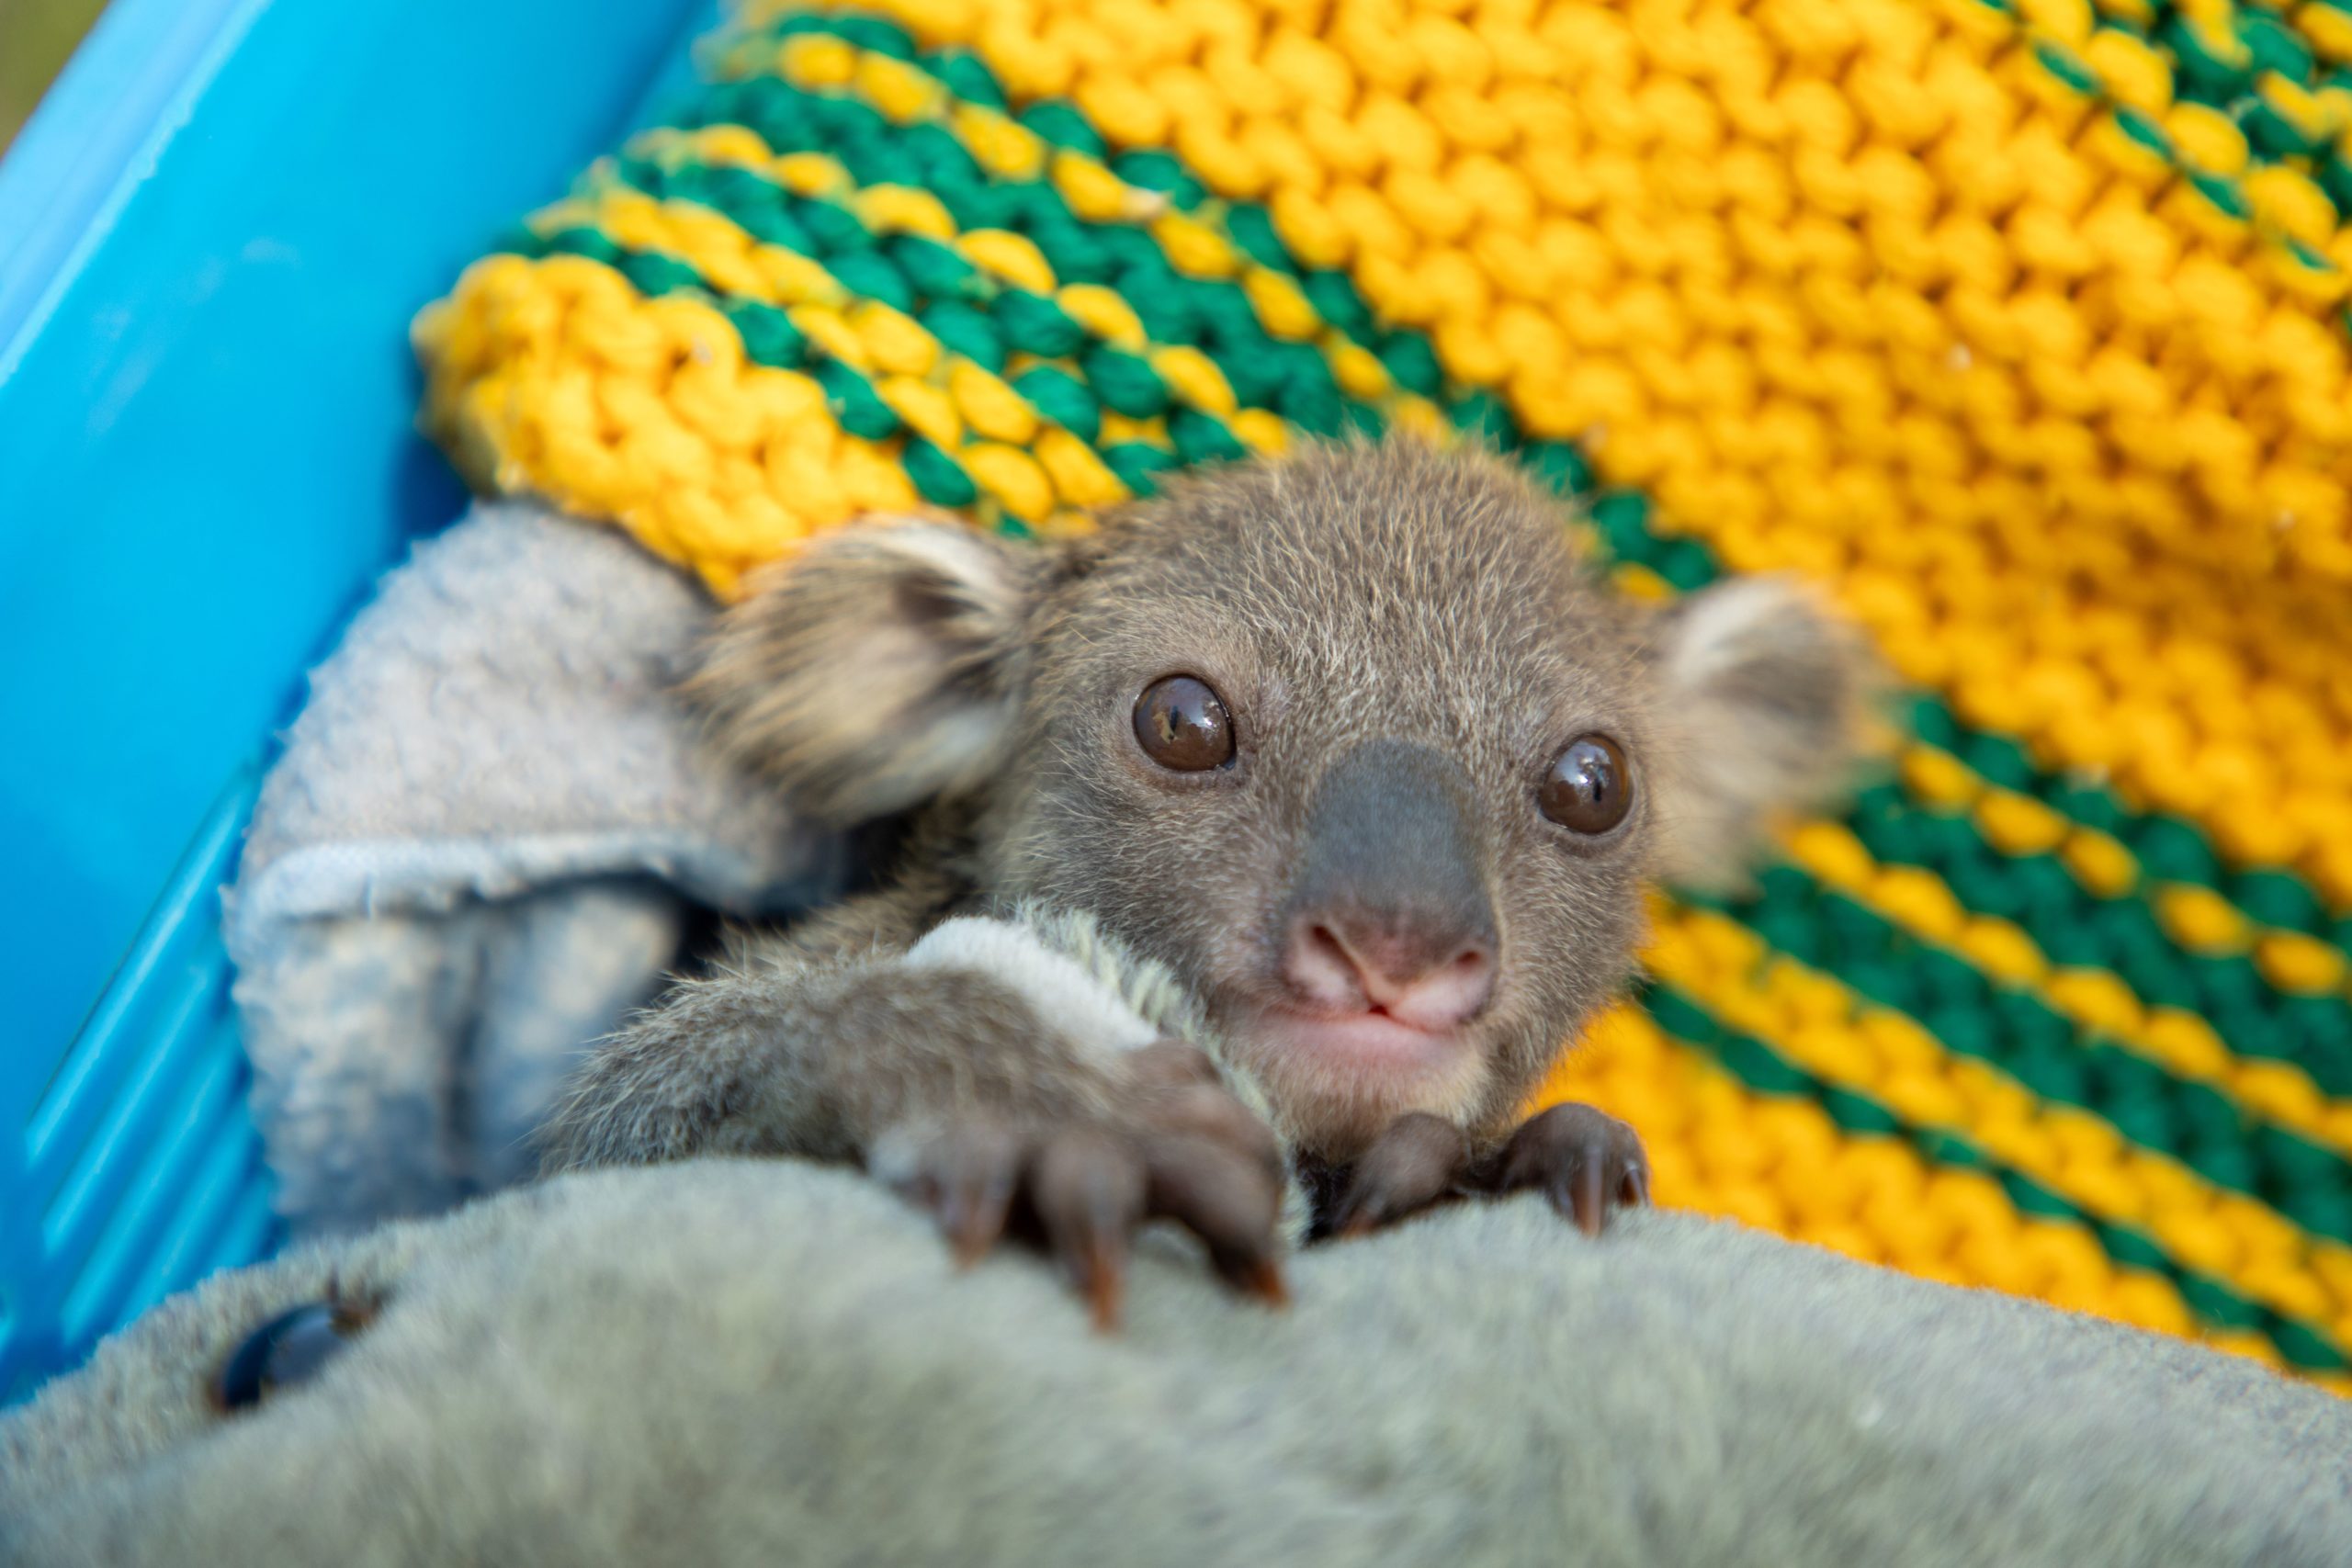 Koala joey thriving after urgent rescue - Central Coast News